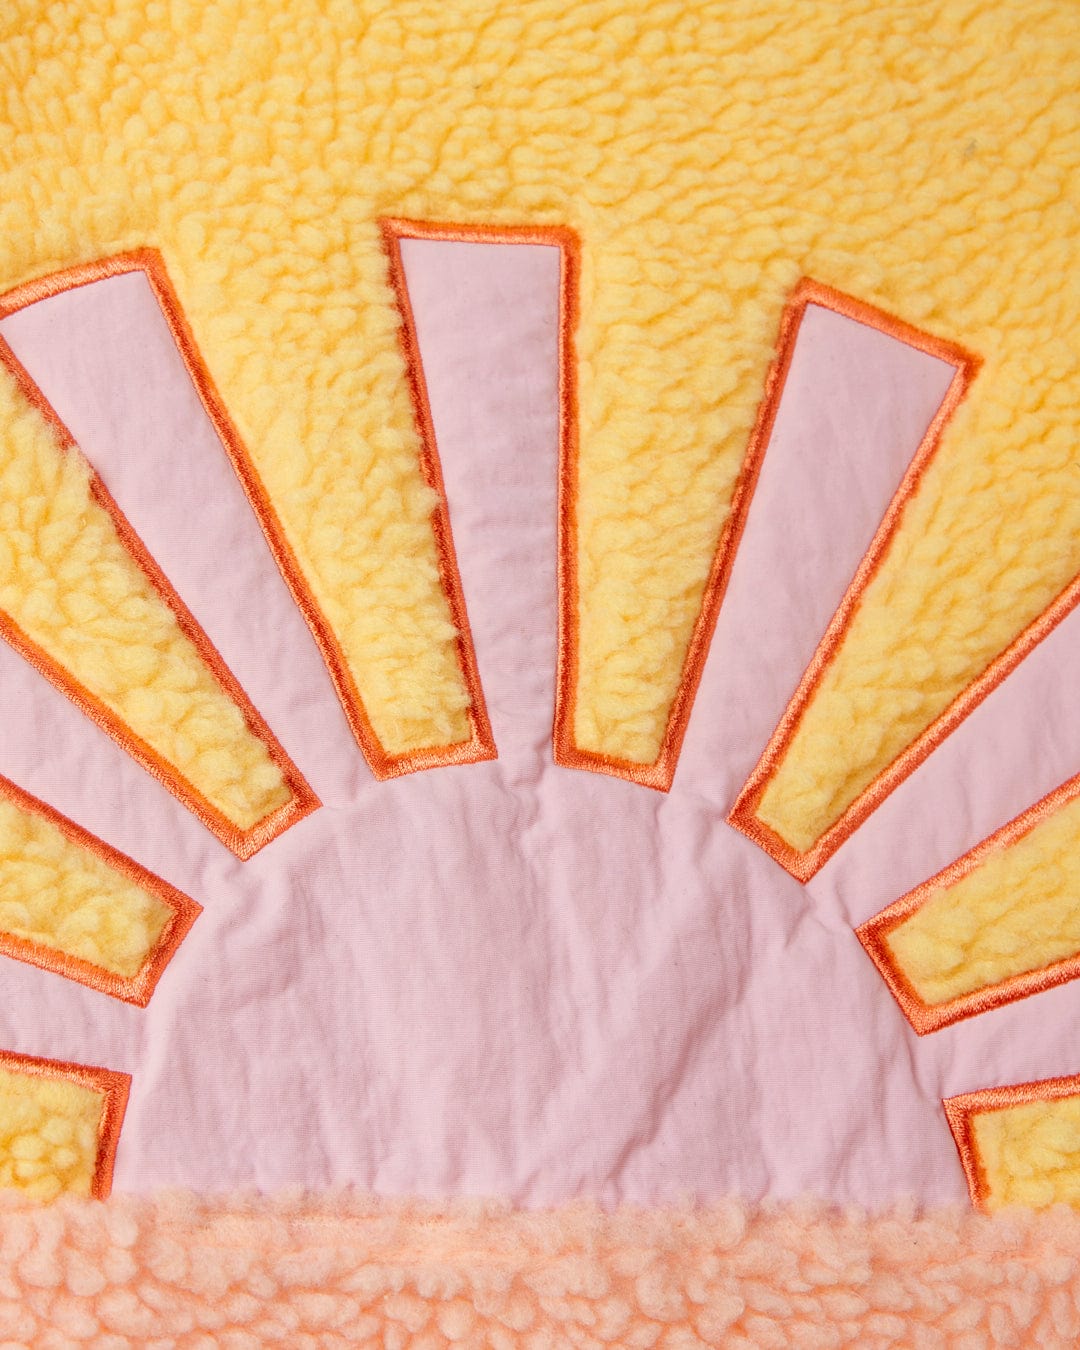 A close up of a Saltrock Emery Sunshine - Kids Sherpa Fleece - Yellow blanket with an embroidered sun graphic.